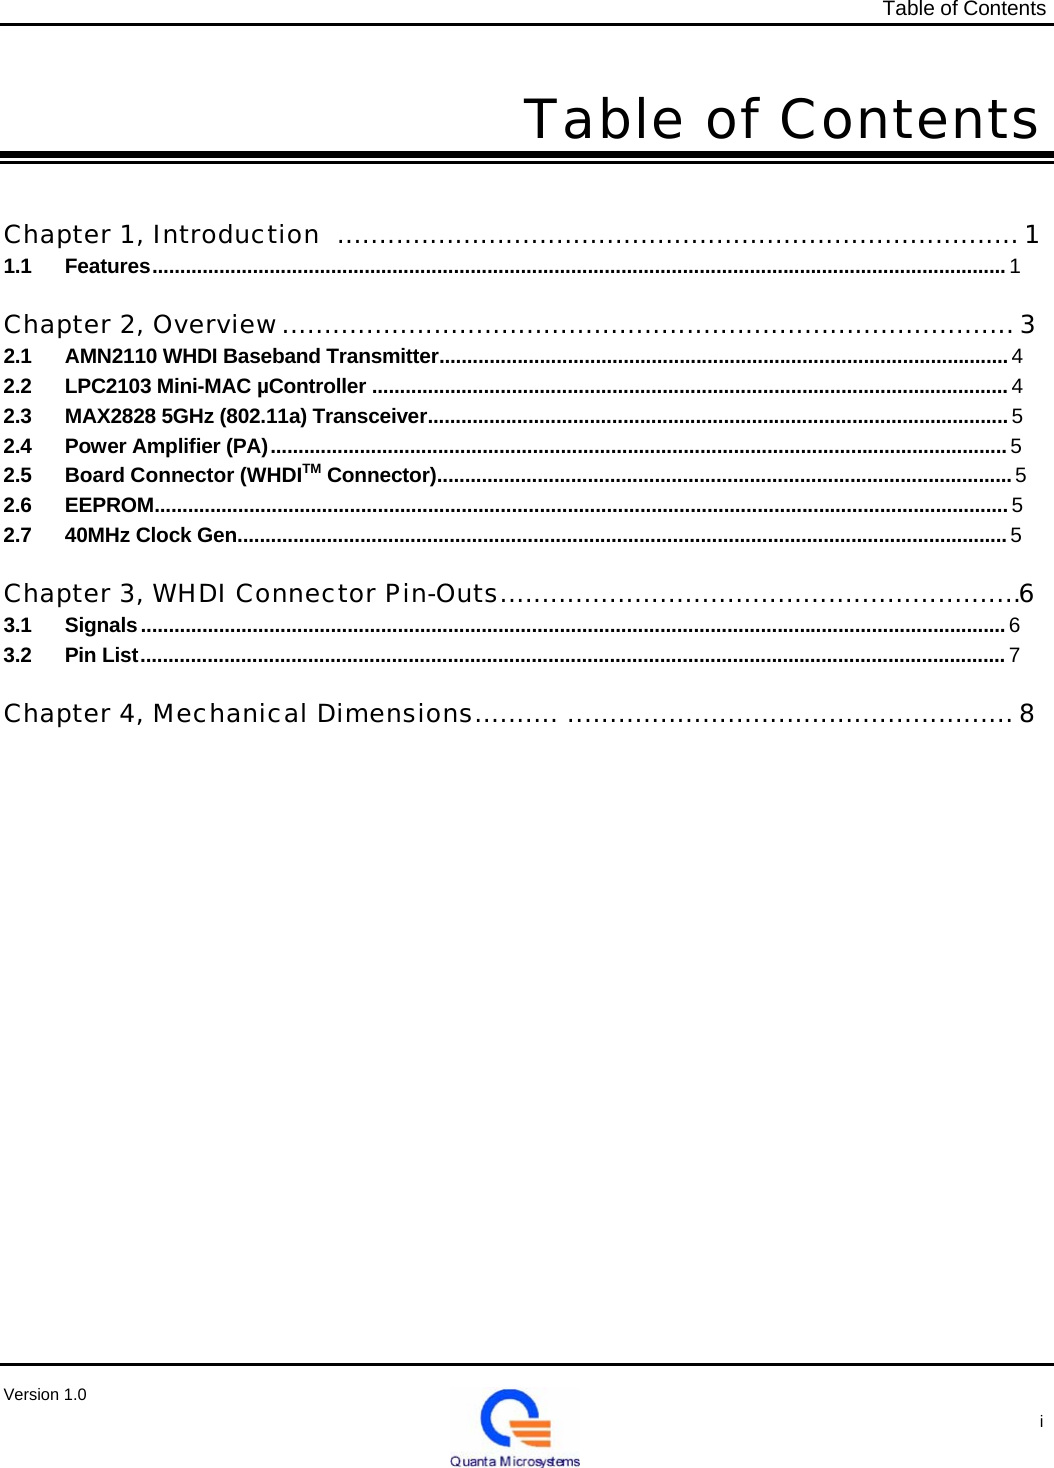   Table of Contents   Table of Contents    Chapter 1, Introduction  ................................................................................. 1 1.1 Features ......................................................................................................................................................... 1   Chapter 2, Overview ....................................................................................... 3 2.1  AMN2110 WHDI Baseband Transmitter...................................................................................................... 4 2.2  LPC2103 Mini-MAC µController .................................................................................................................. 4 2.3  MAX2828 5GHz (802.11a) Transceiver........................................................................................................ 5 2.4  Power Amplifier (PA) .................................................................................................................................... 5 2.5  Board Connector (WHDITM Connector)....................................................................................................... 5 2.6 EEPROM......................................................................................................................................................... 5 2.7  40MHz Clock Gen.......................................................................................................................................... 5   Chapter 3, WHDI Connector Pin-Outs..............................................................6 3.1 Signals ........................................................................................................................................................... 6 3.2 Pin List ........................................................................................................................................................... 7   Chapter 4, Mechanical Dimensions.......... ..................................................... 8                               Version 1.0                                                                                                   i 